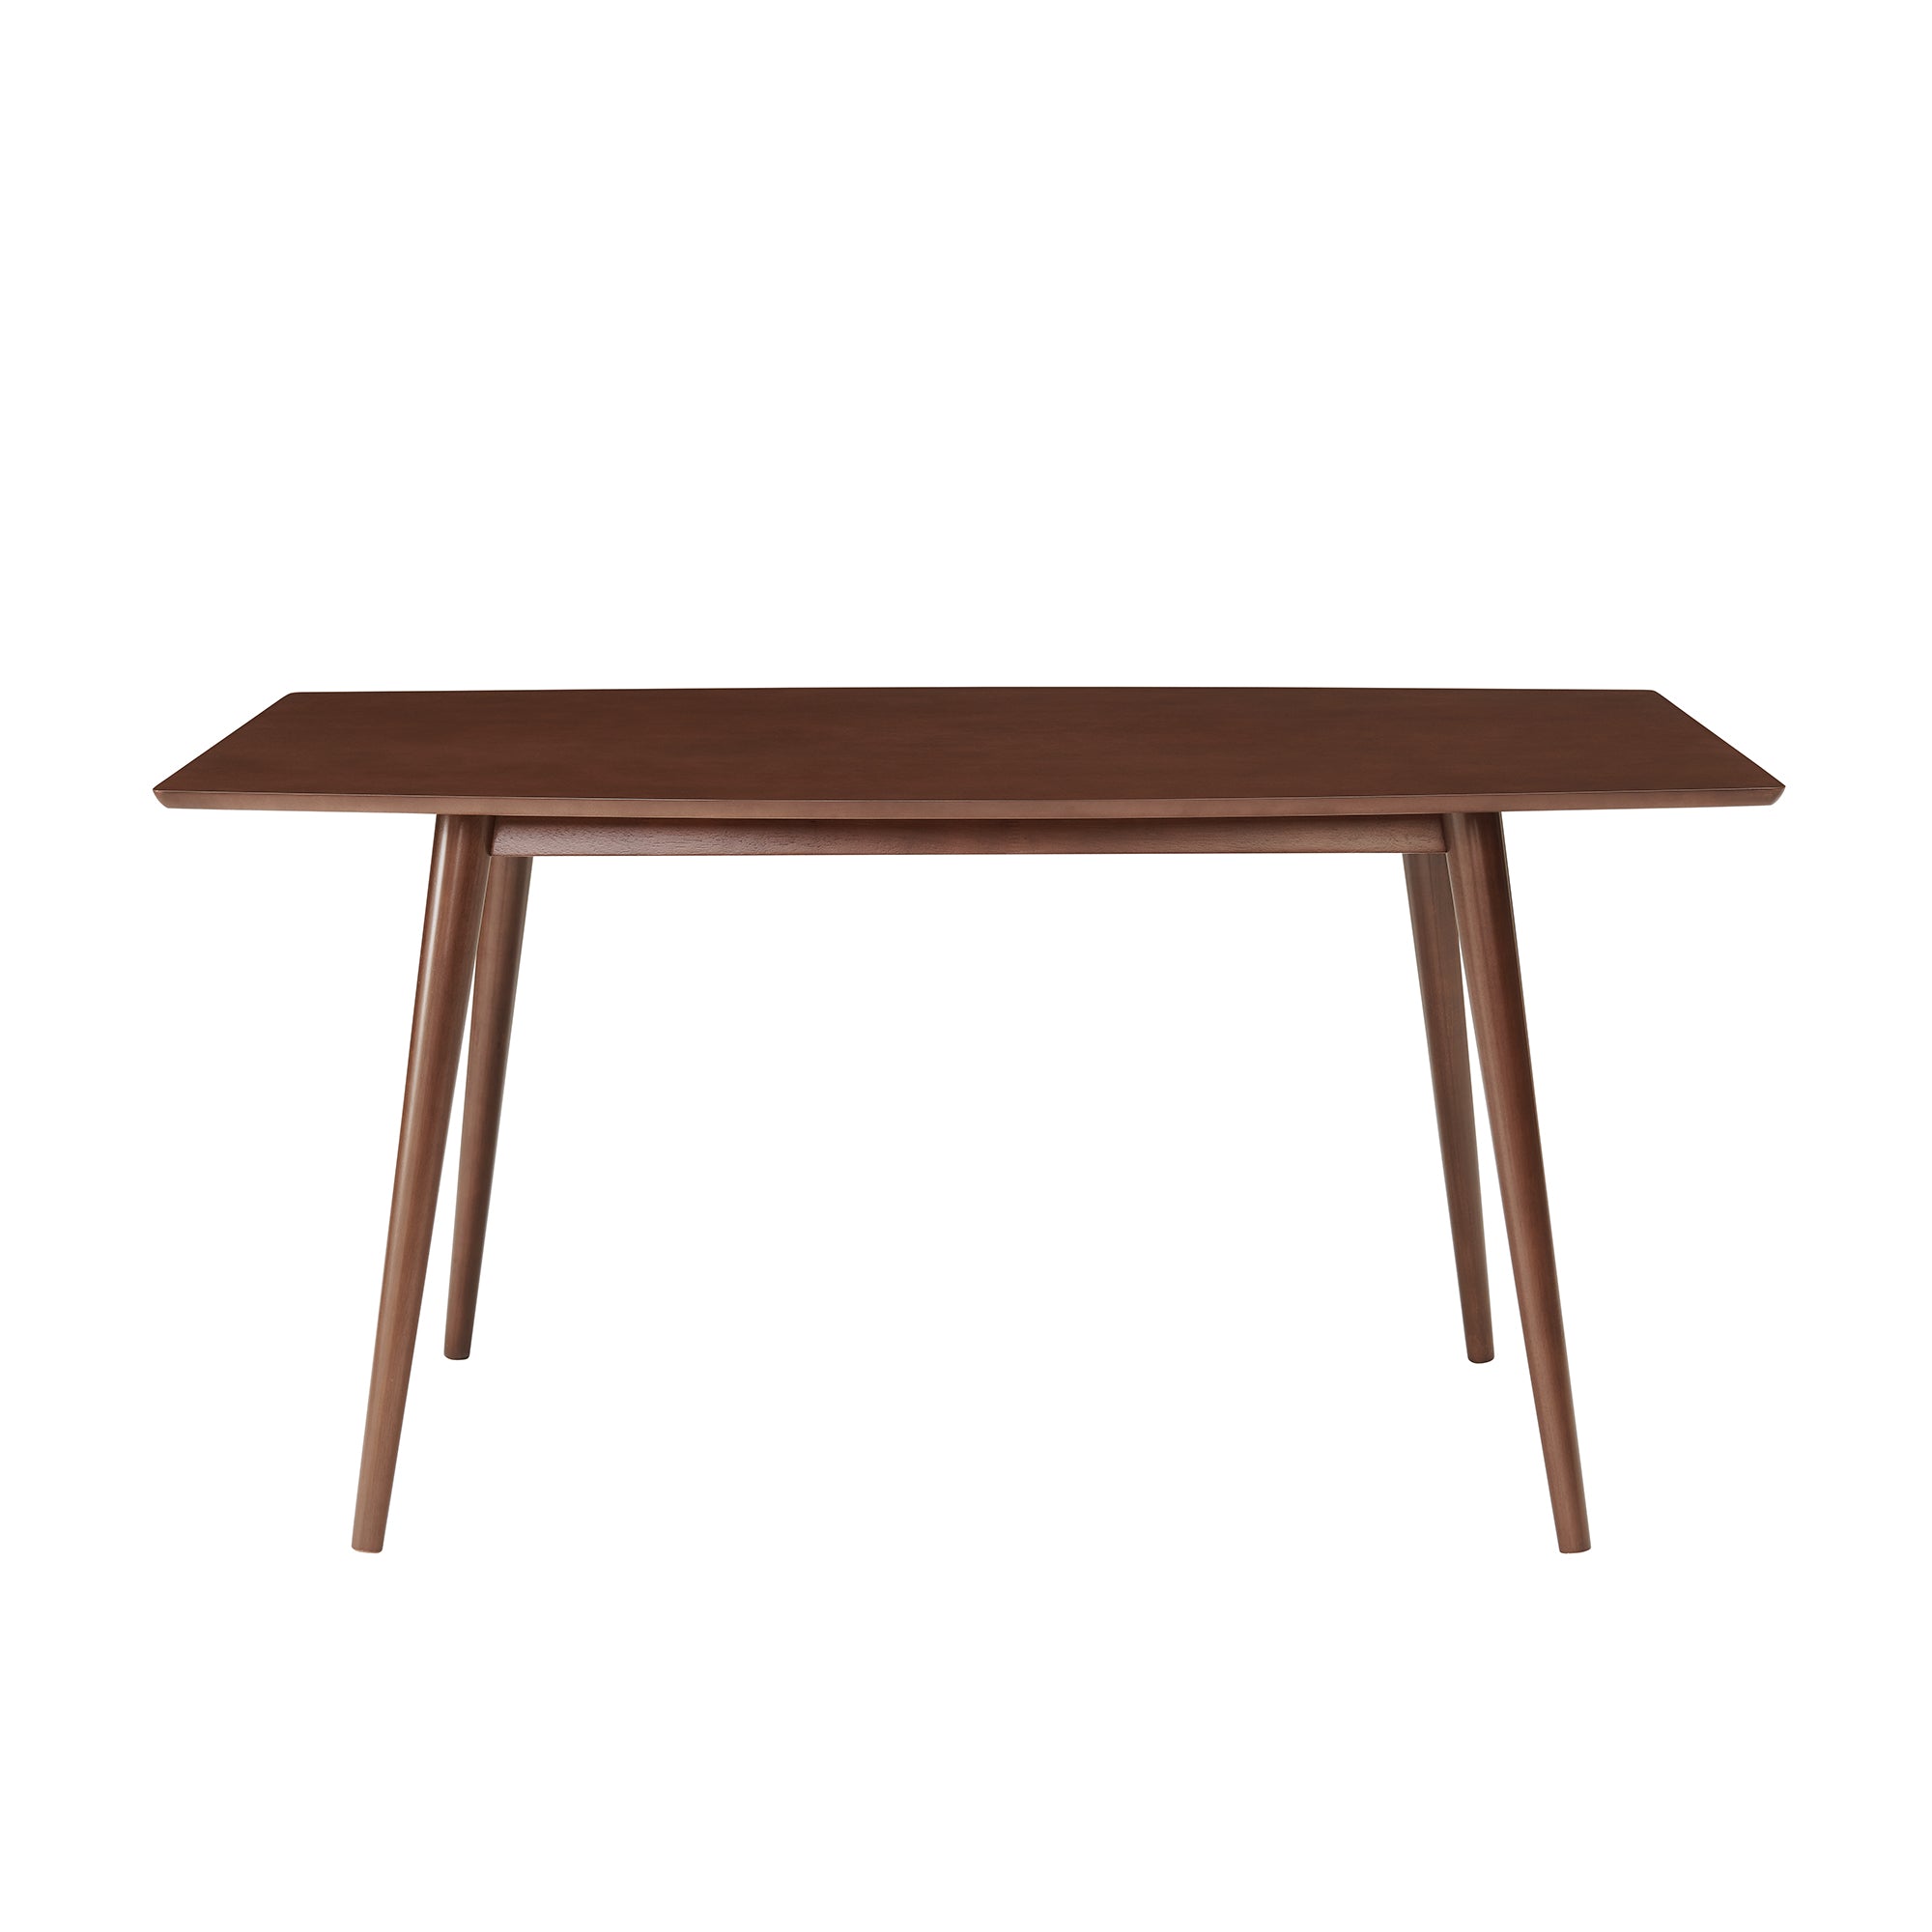 60" Mid Century Wood Dining Table - East Shore Modern Home Furnishings